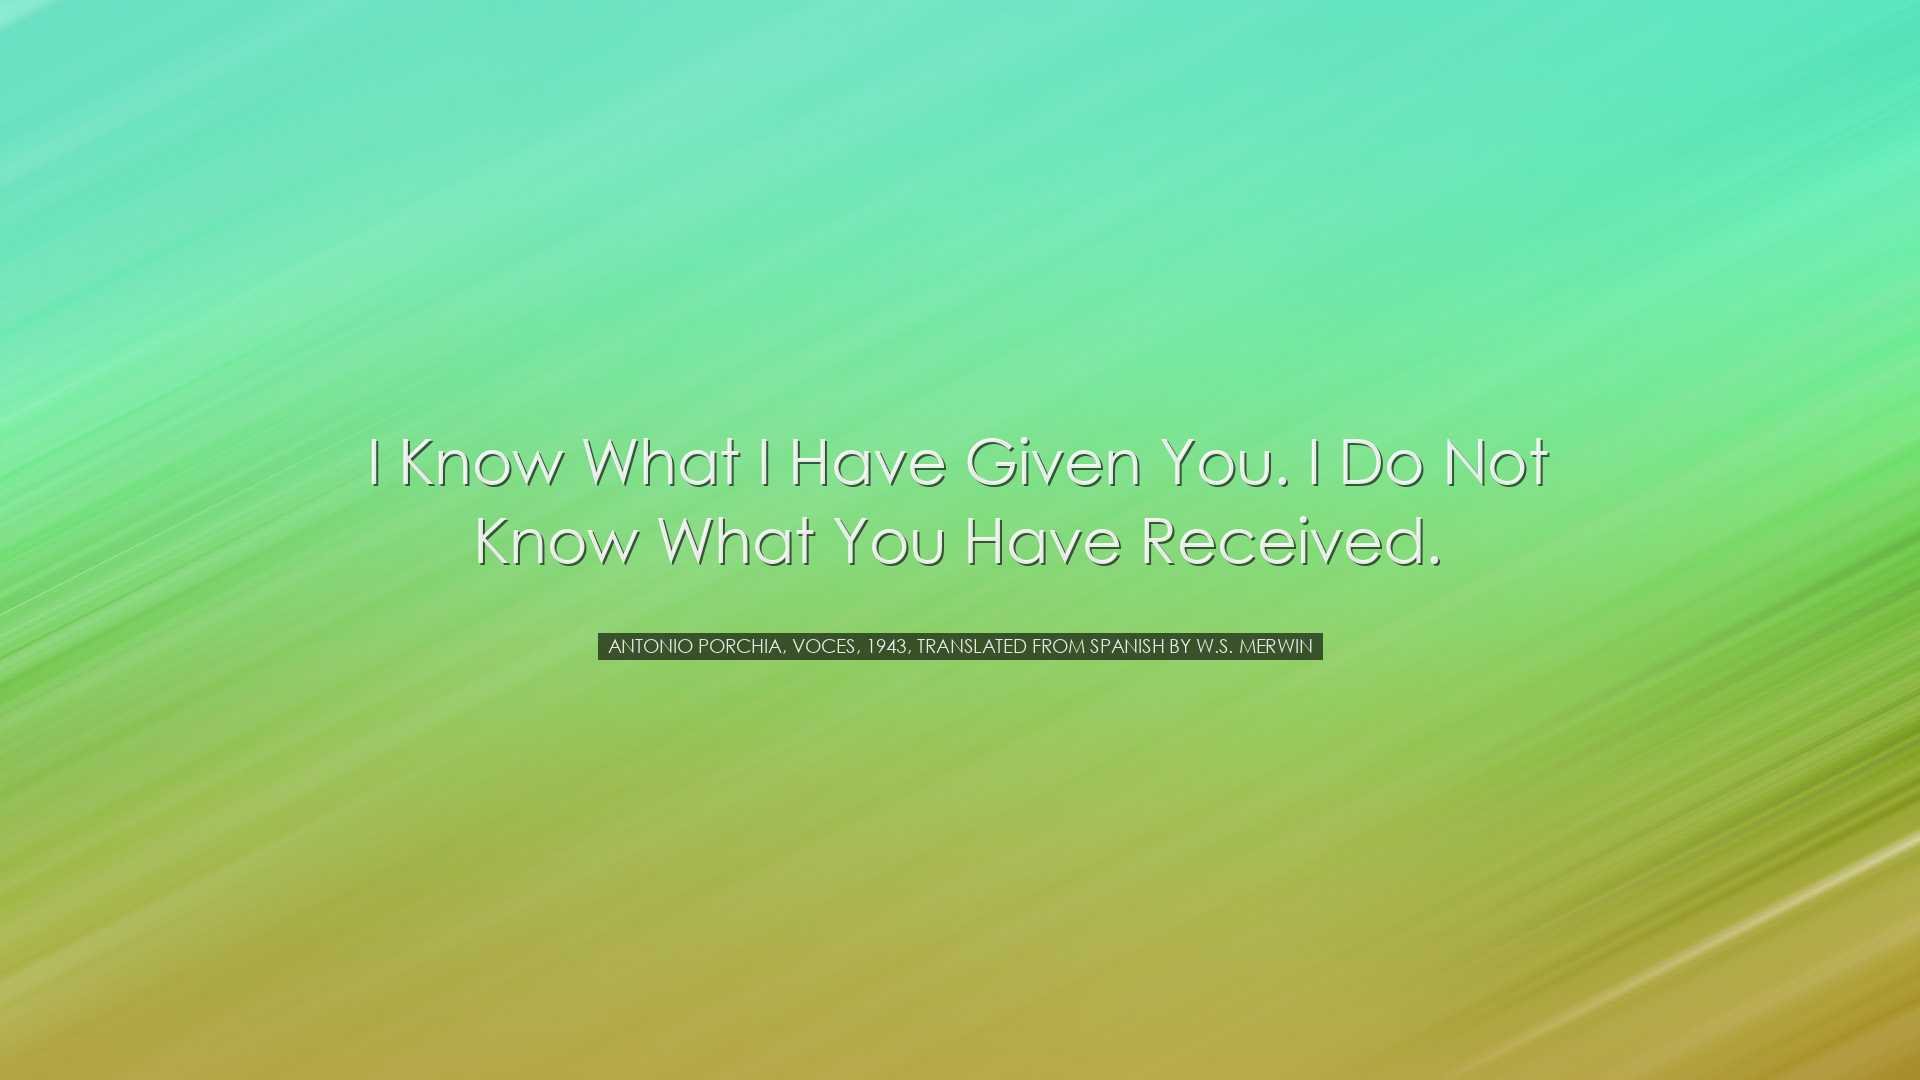 I know what I have given you. I do not know what you have received